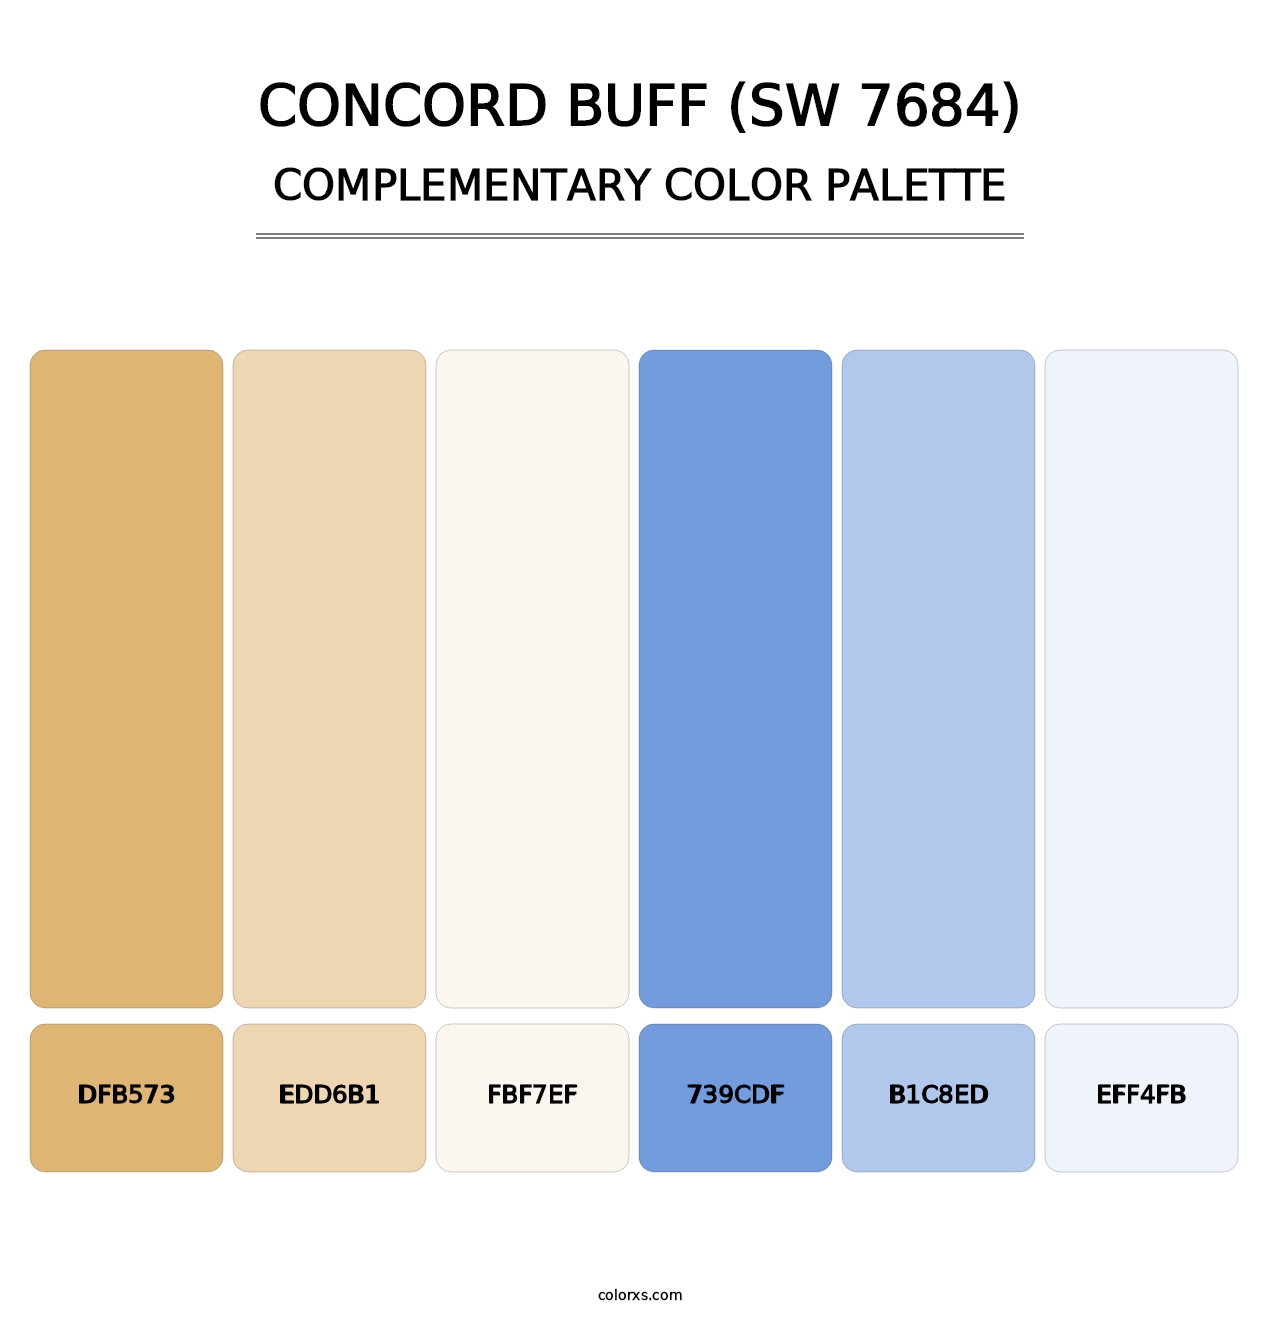 Concord Buff (SW 7684) - Complementary Color Palette